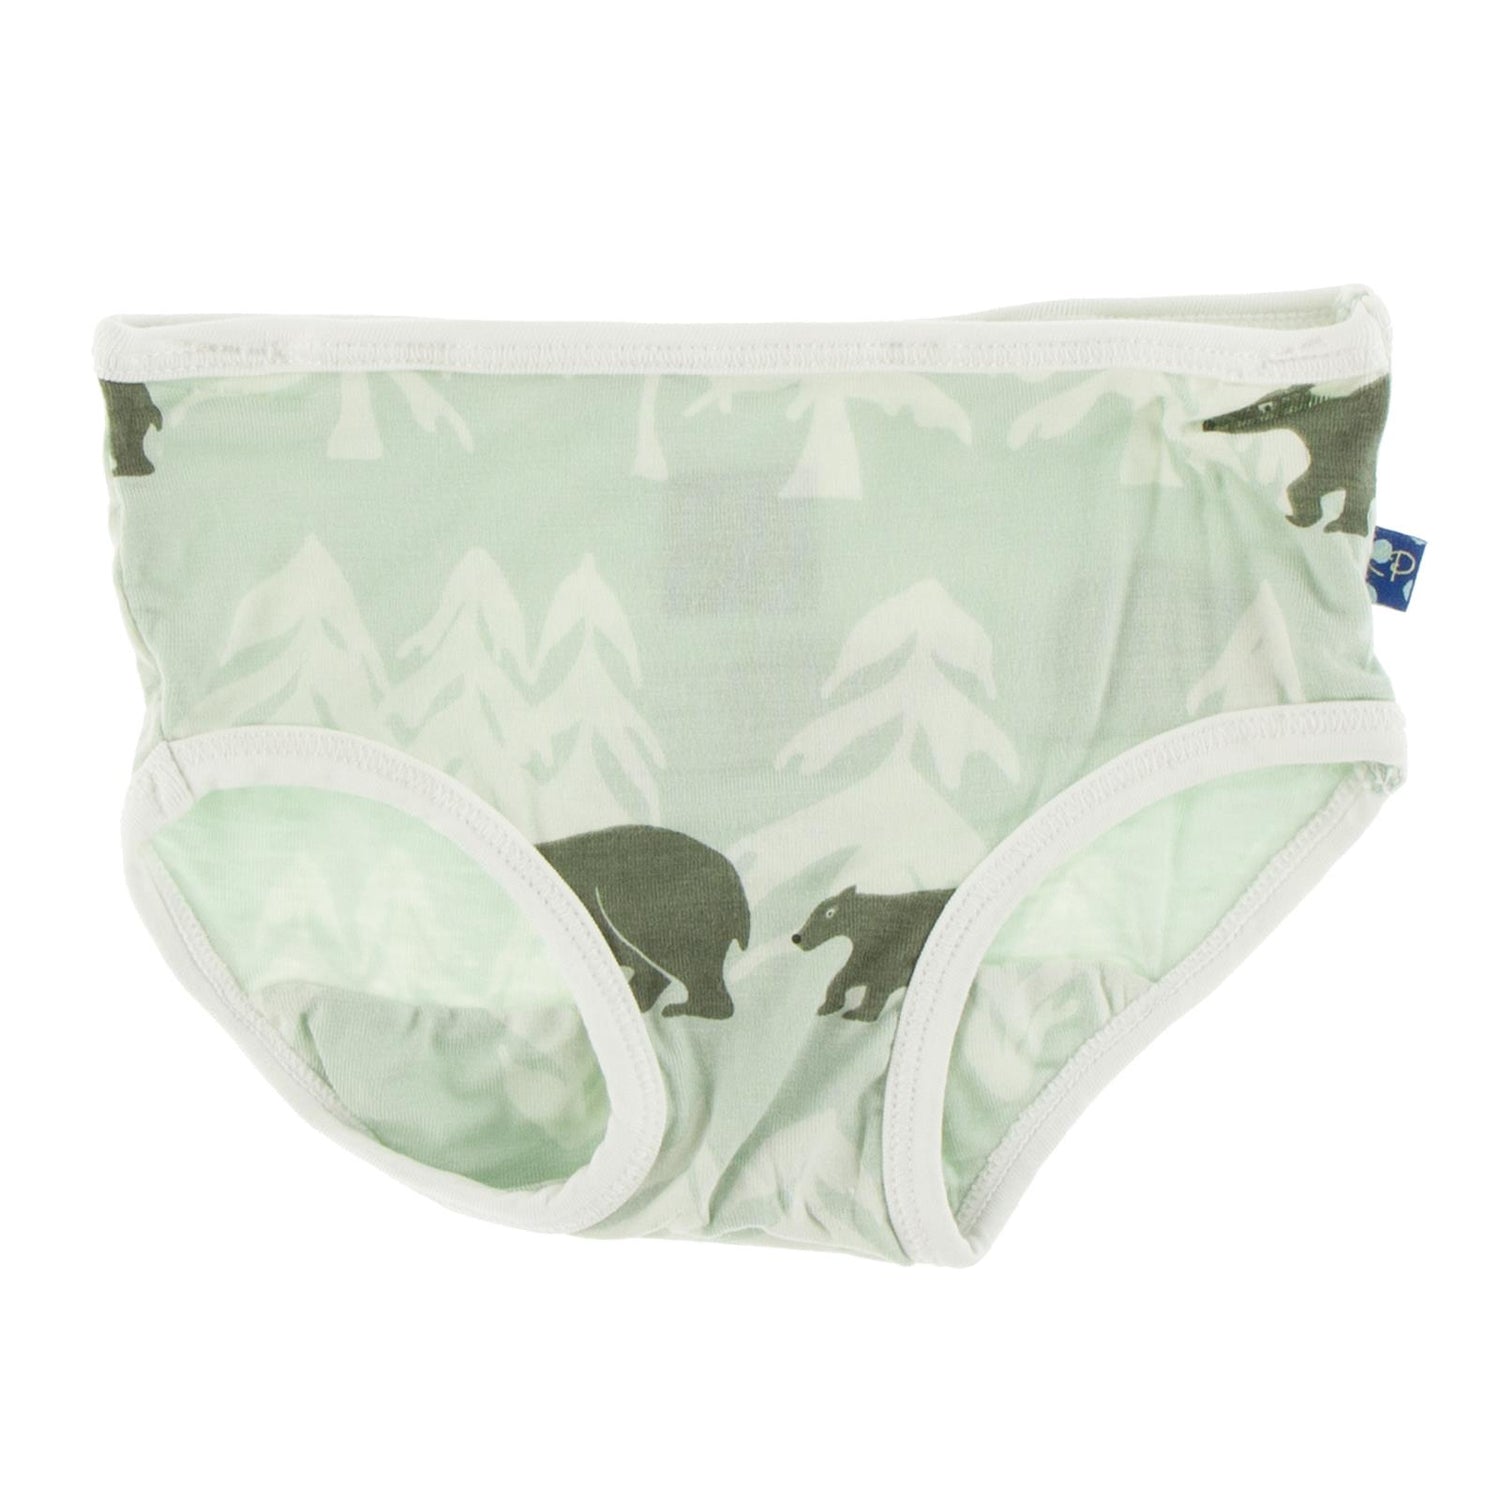 Print Underwear in Aloe Bears and Treeline with Natural Trim